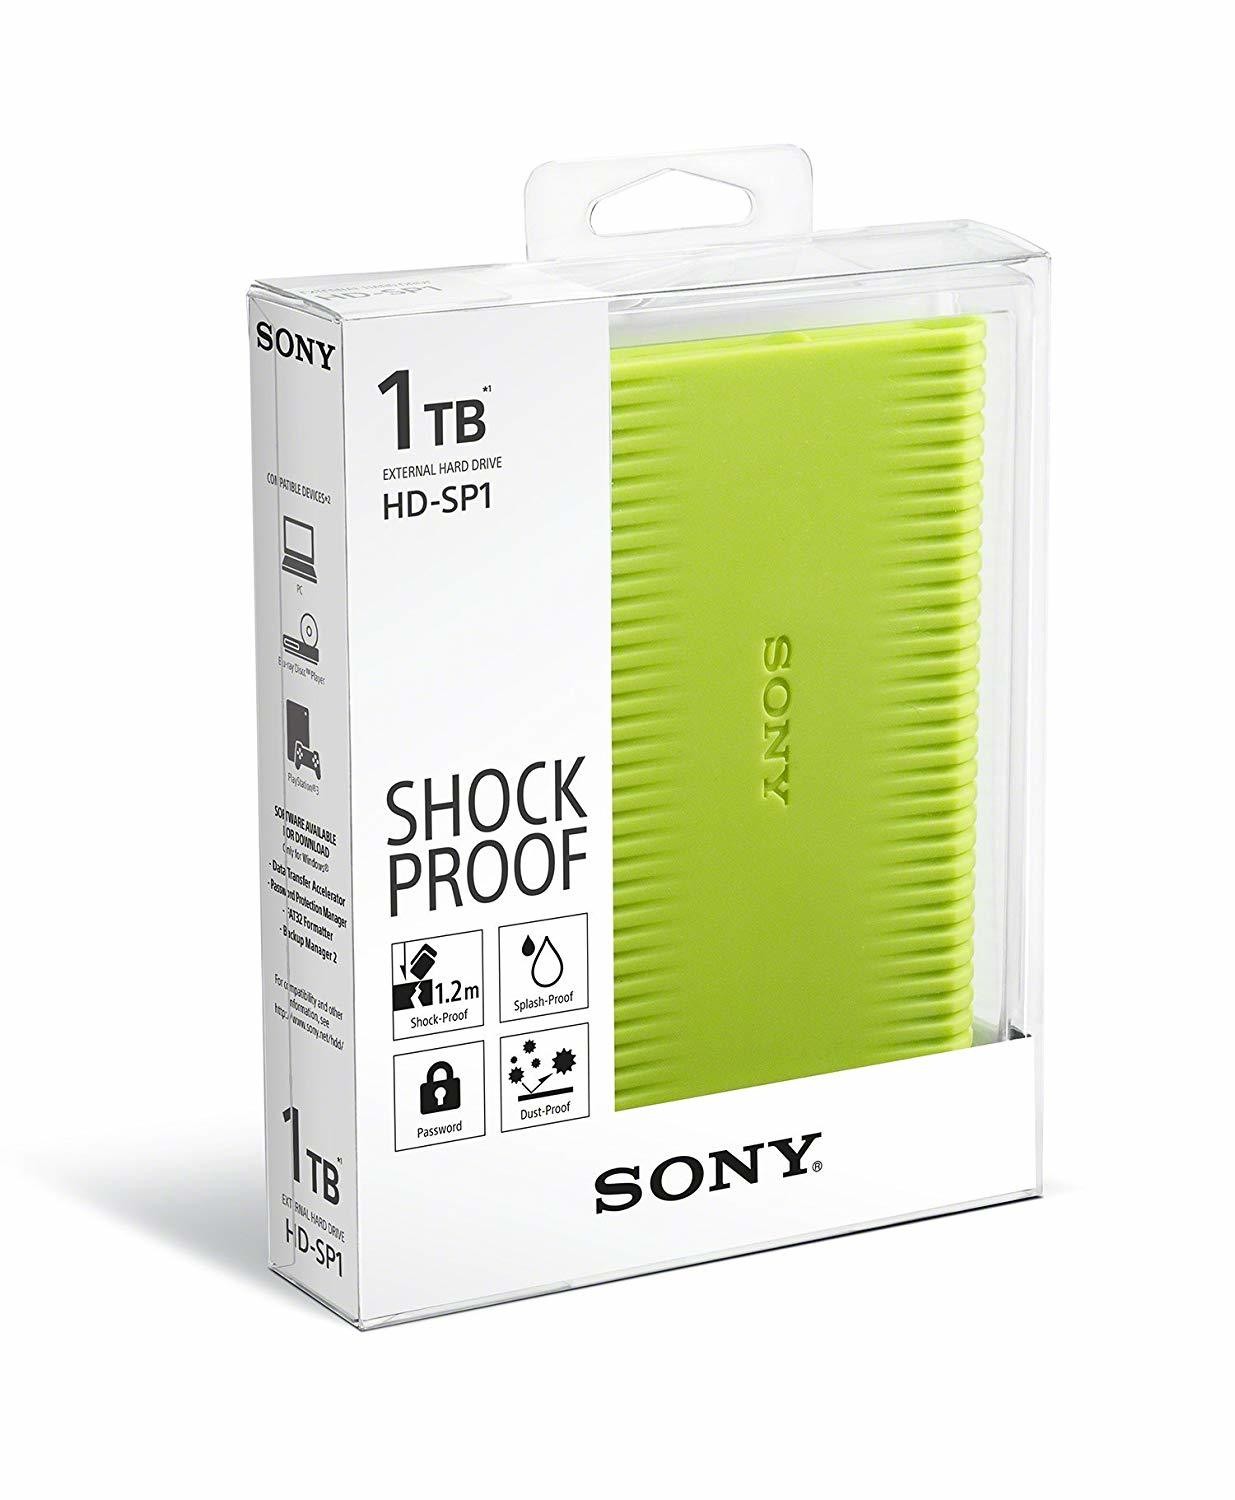 Sony 1TB HD-SP1 Shock-Proof External Hard Drive with Backup Manager, Green